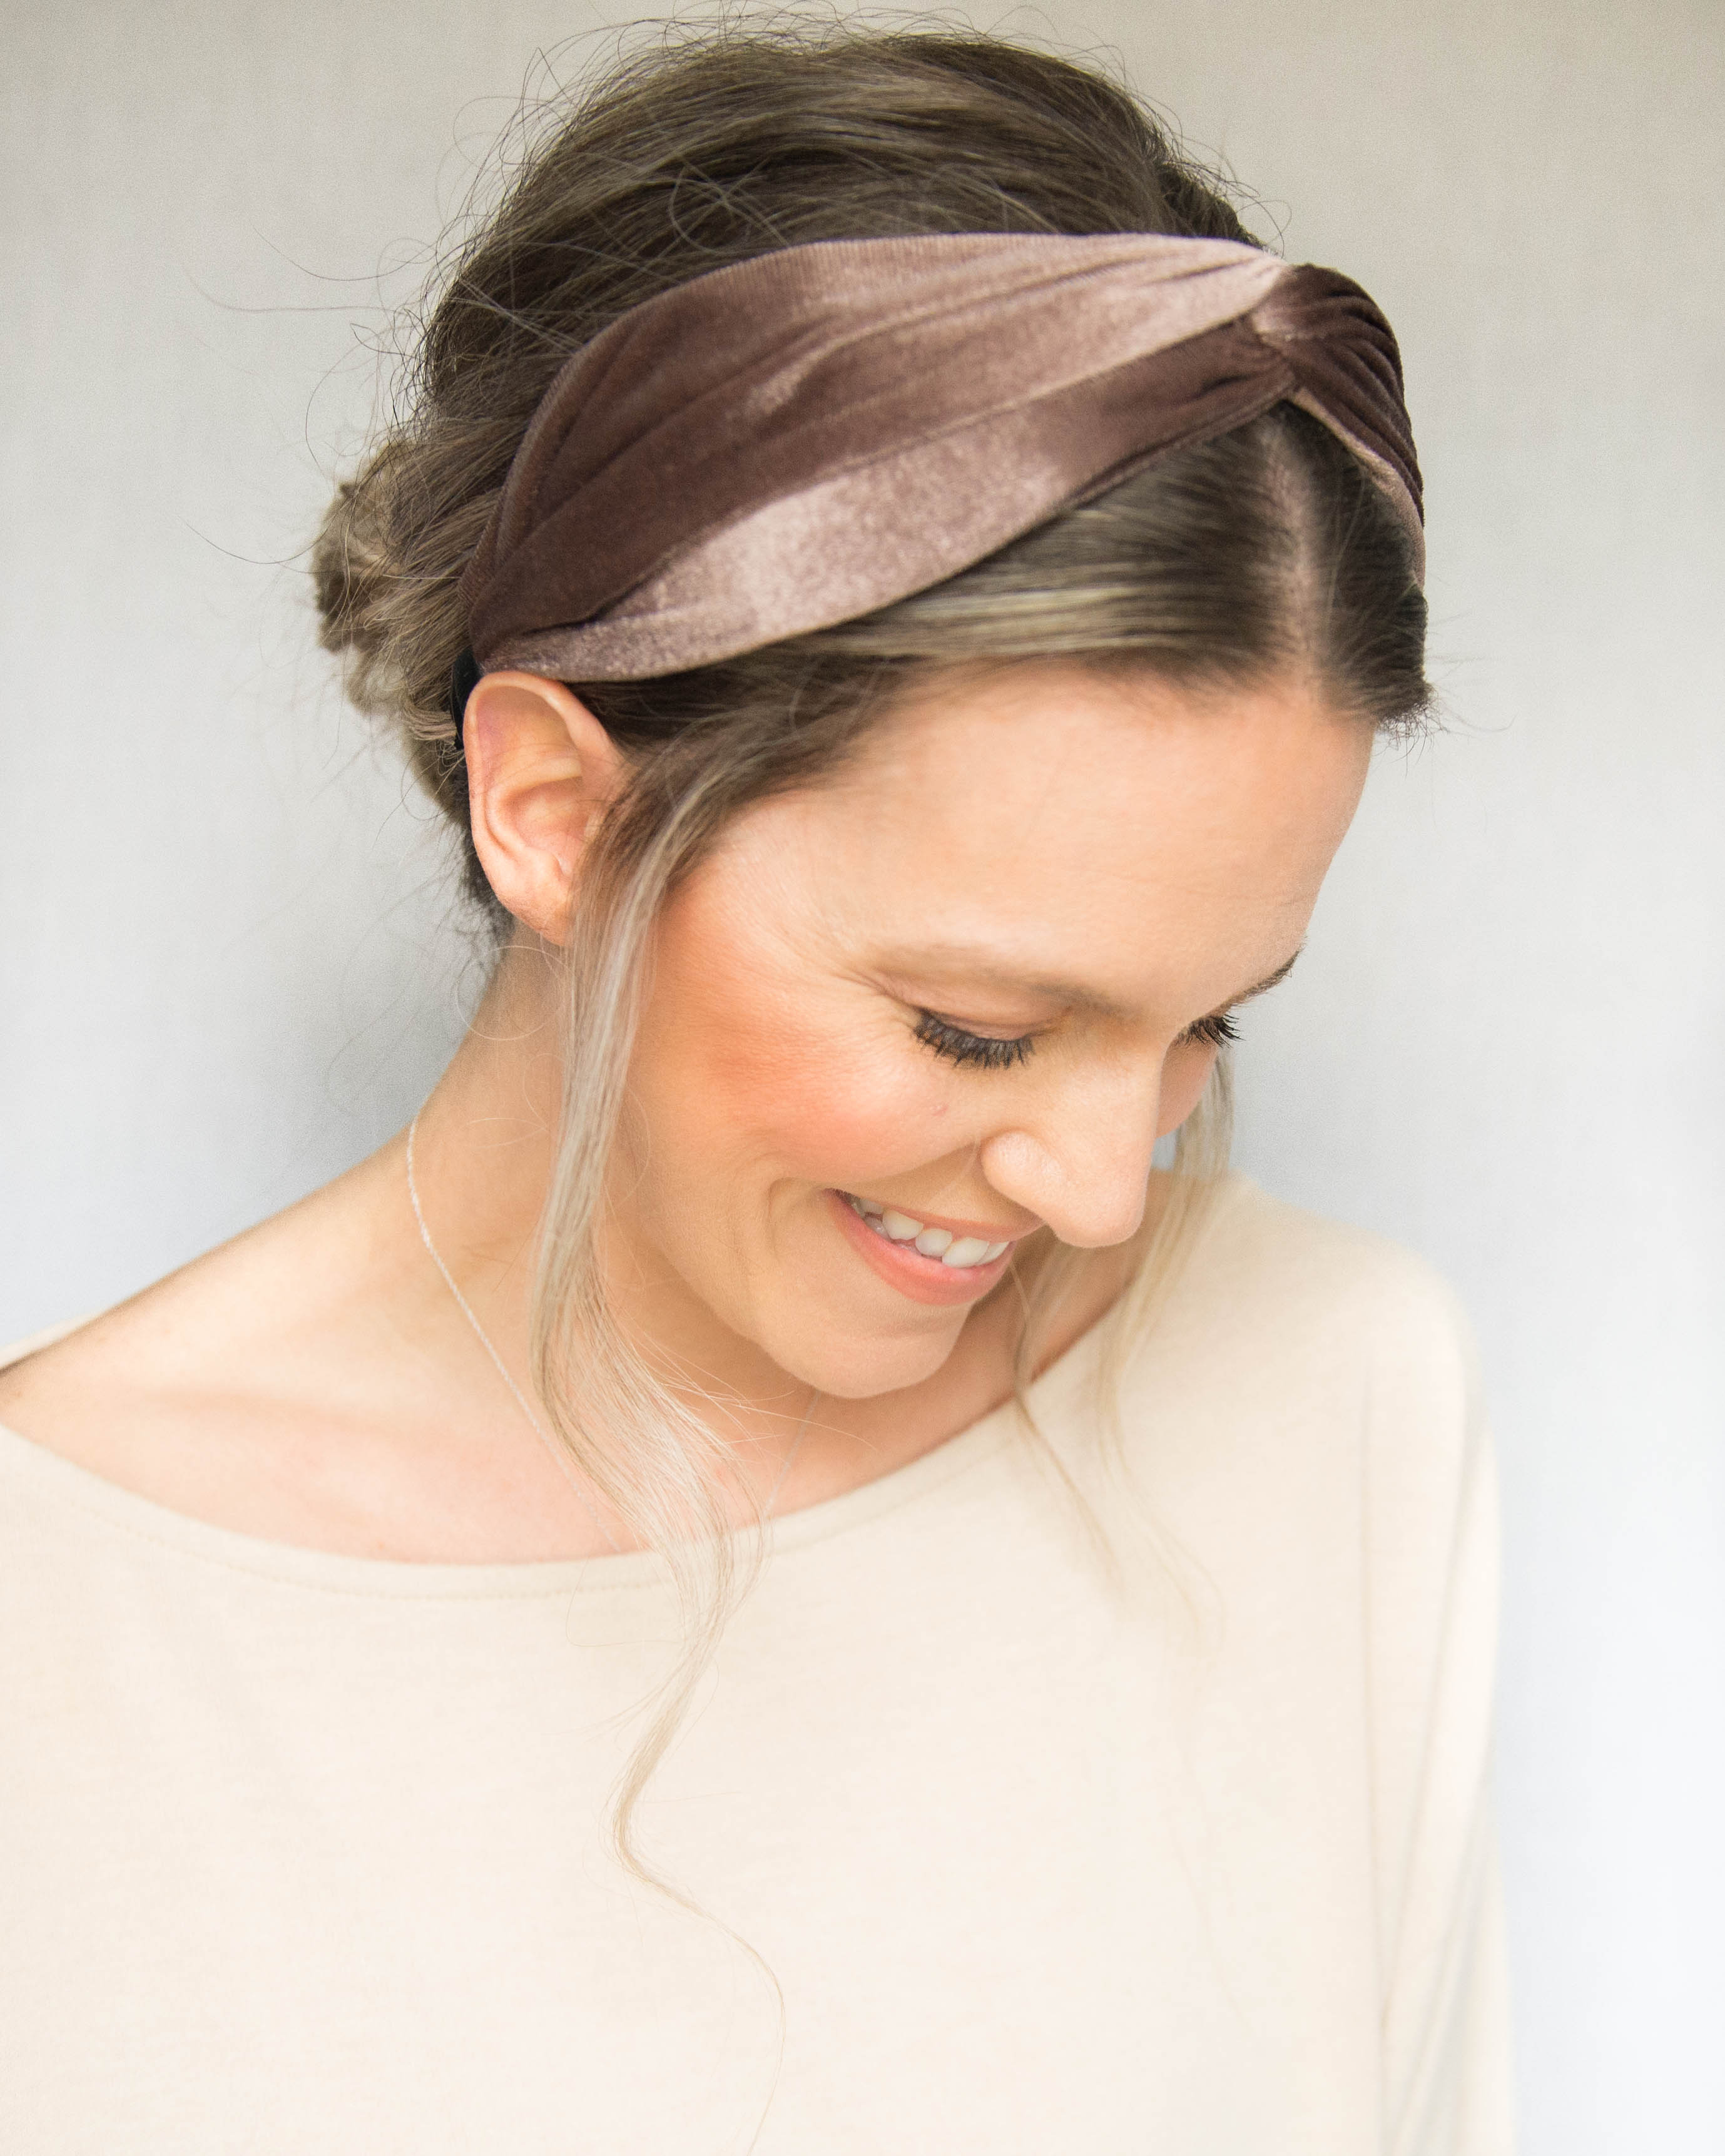 How To Wear A Headband: Effortless Hairstyles For Everyday - Lulus